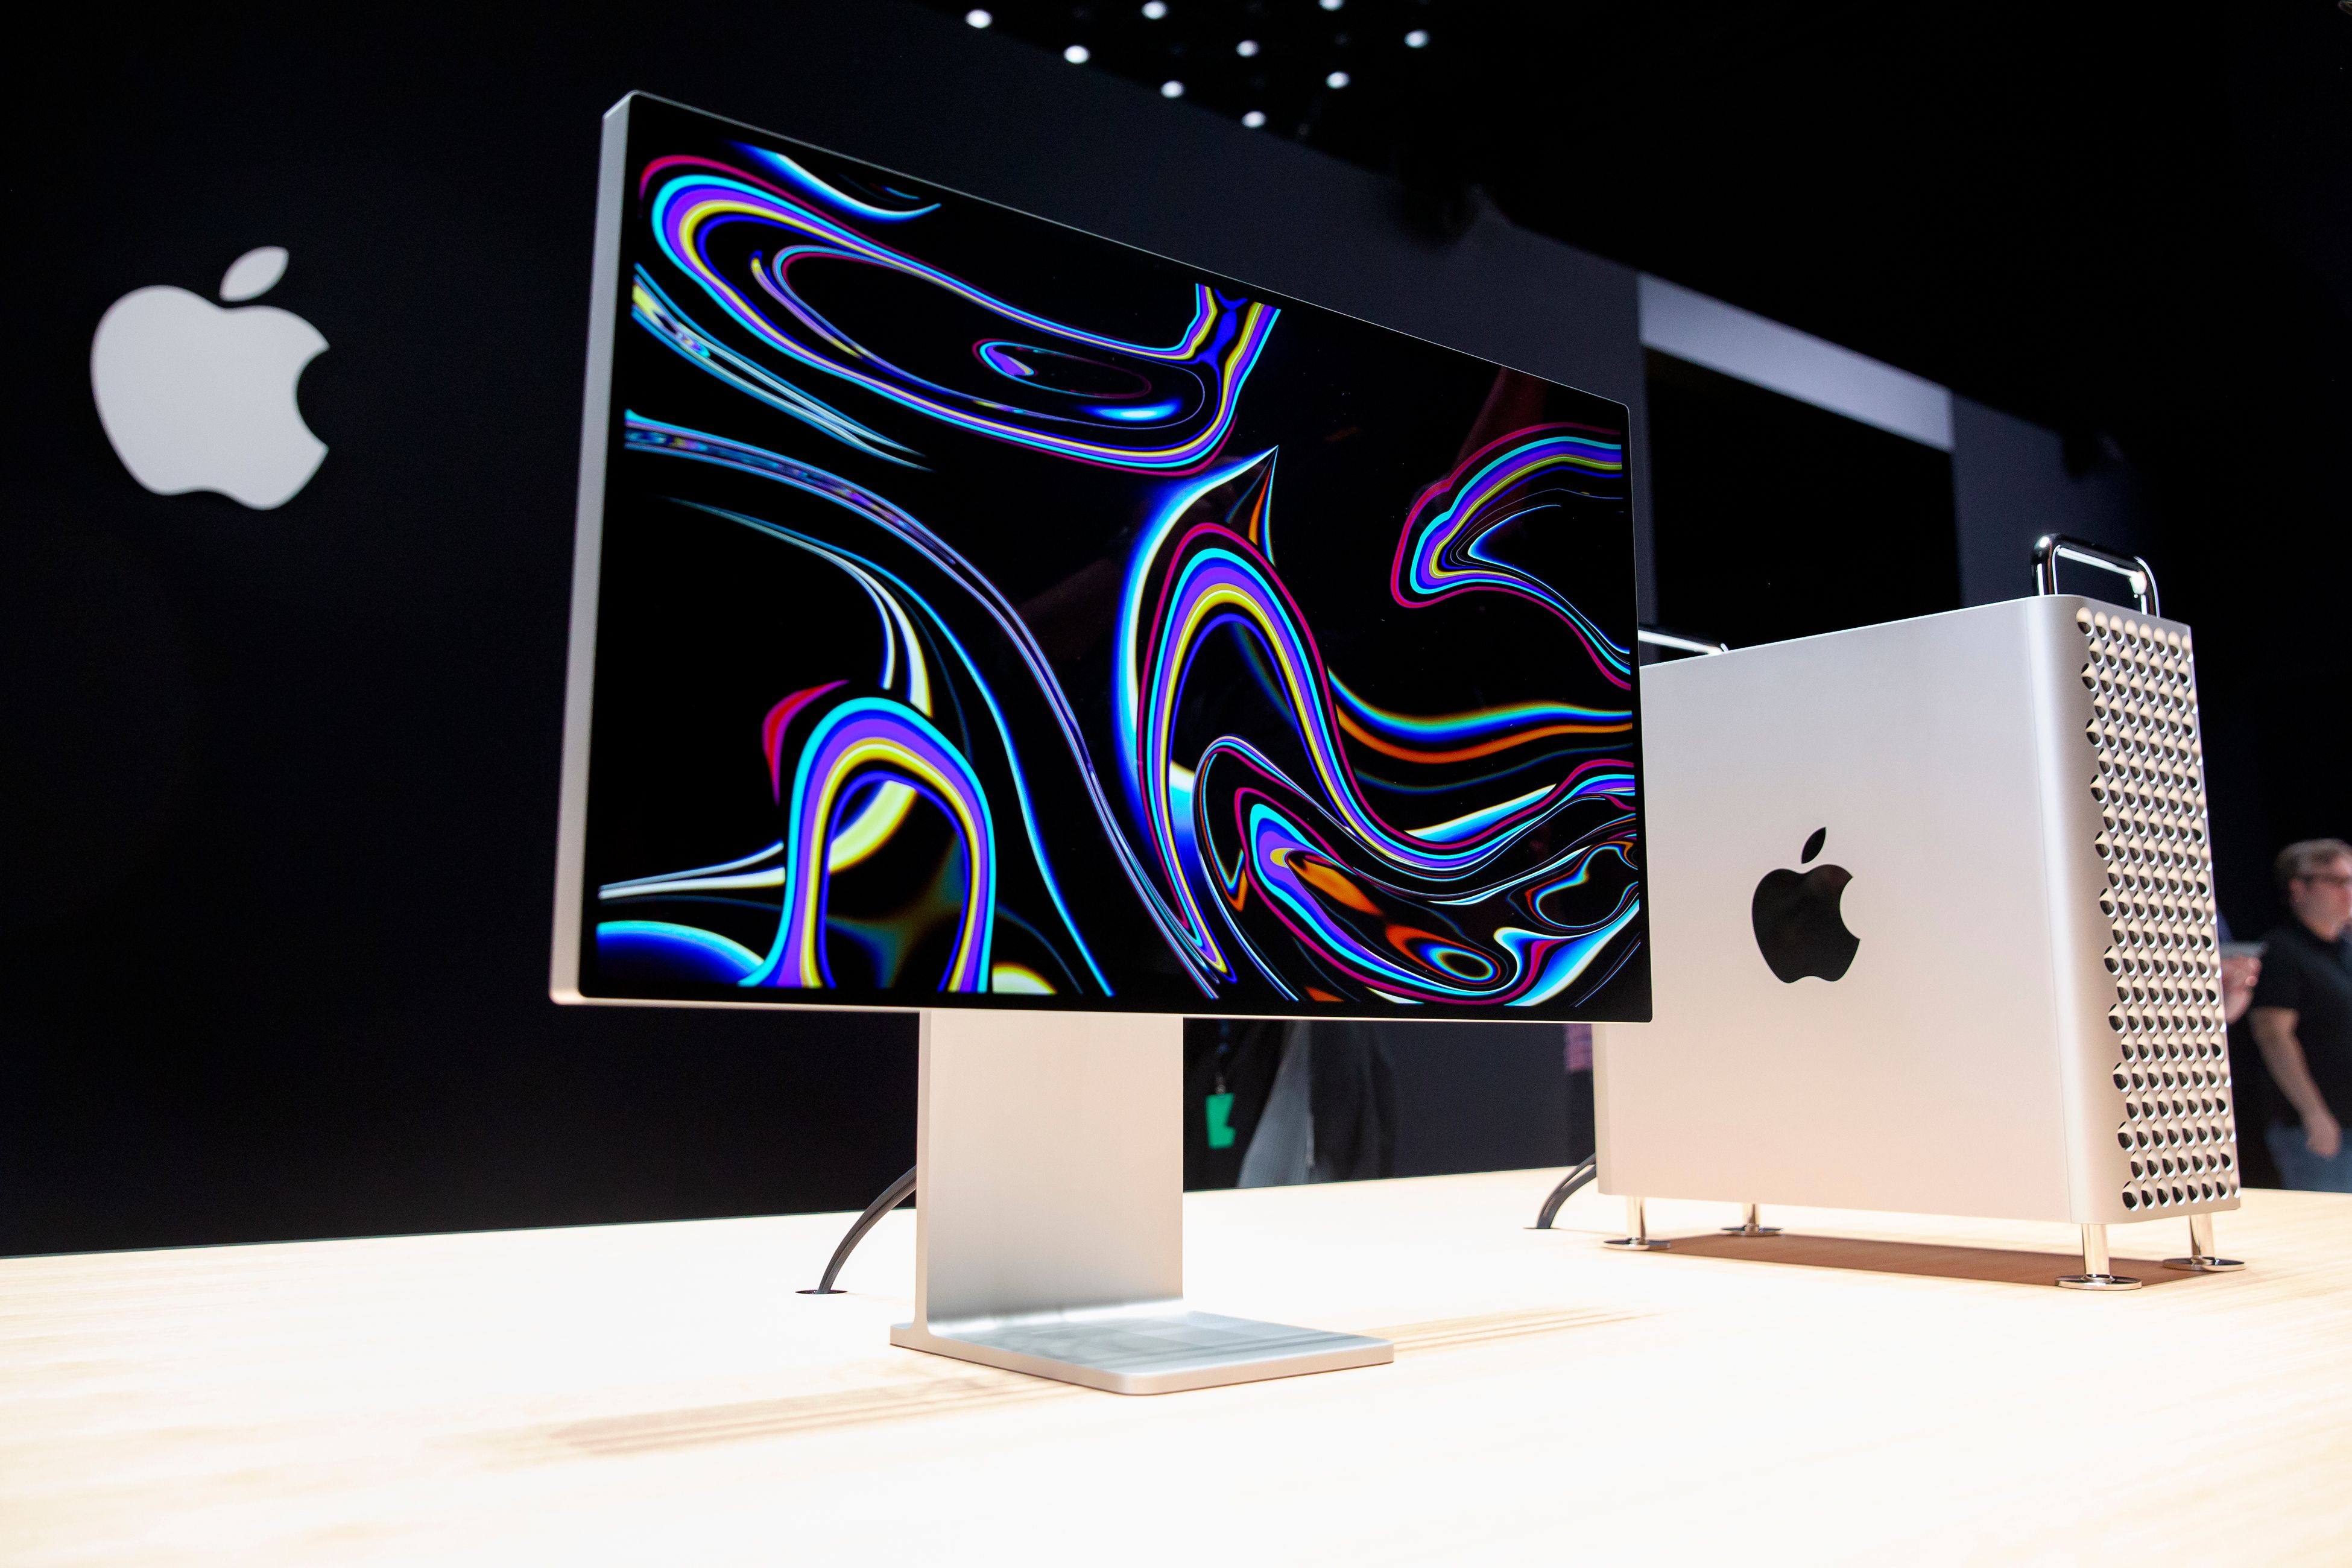 Apple’s Mac Pro sits on display in a showroom during the US tech giant's 2019 Worldwide Developer Conference in San Jose, California. Photo: Agence France-Presse